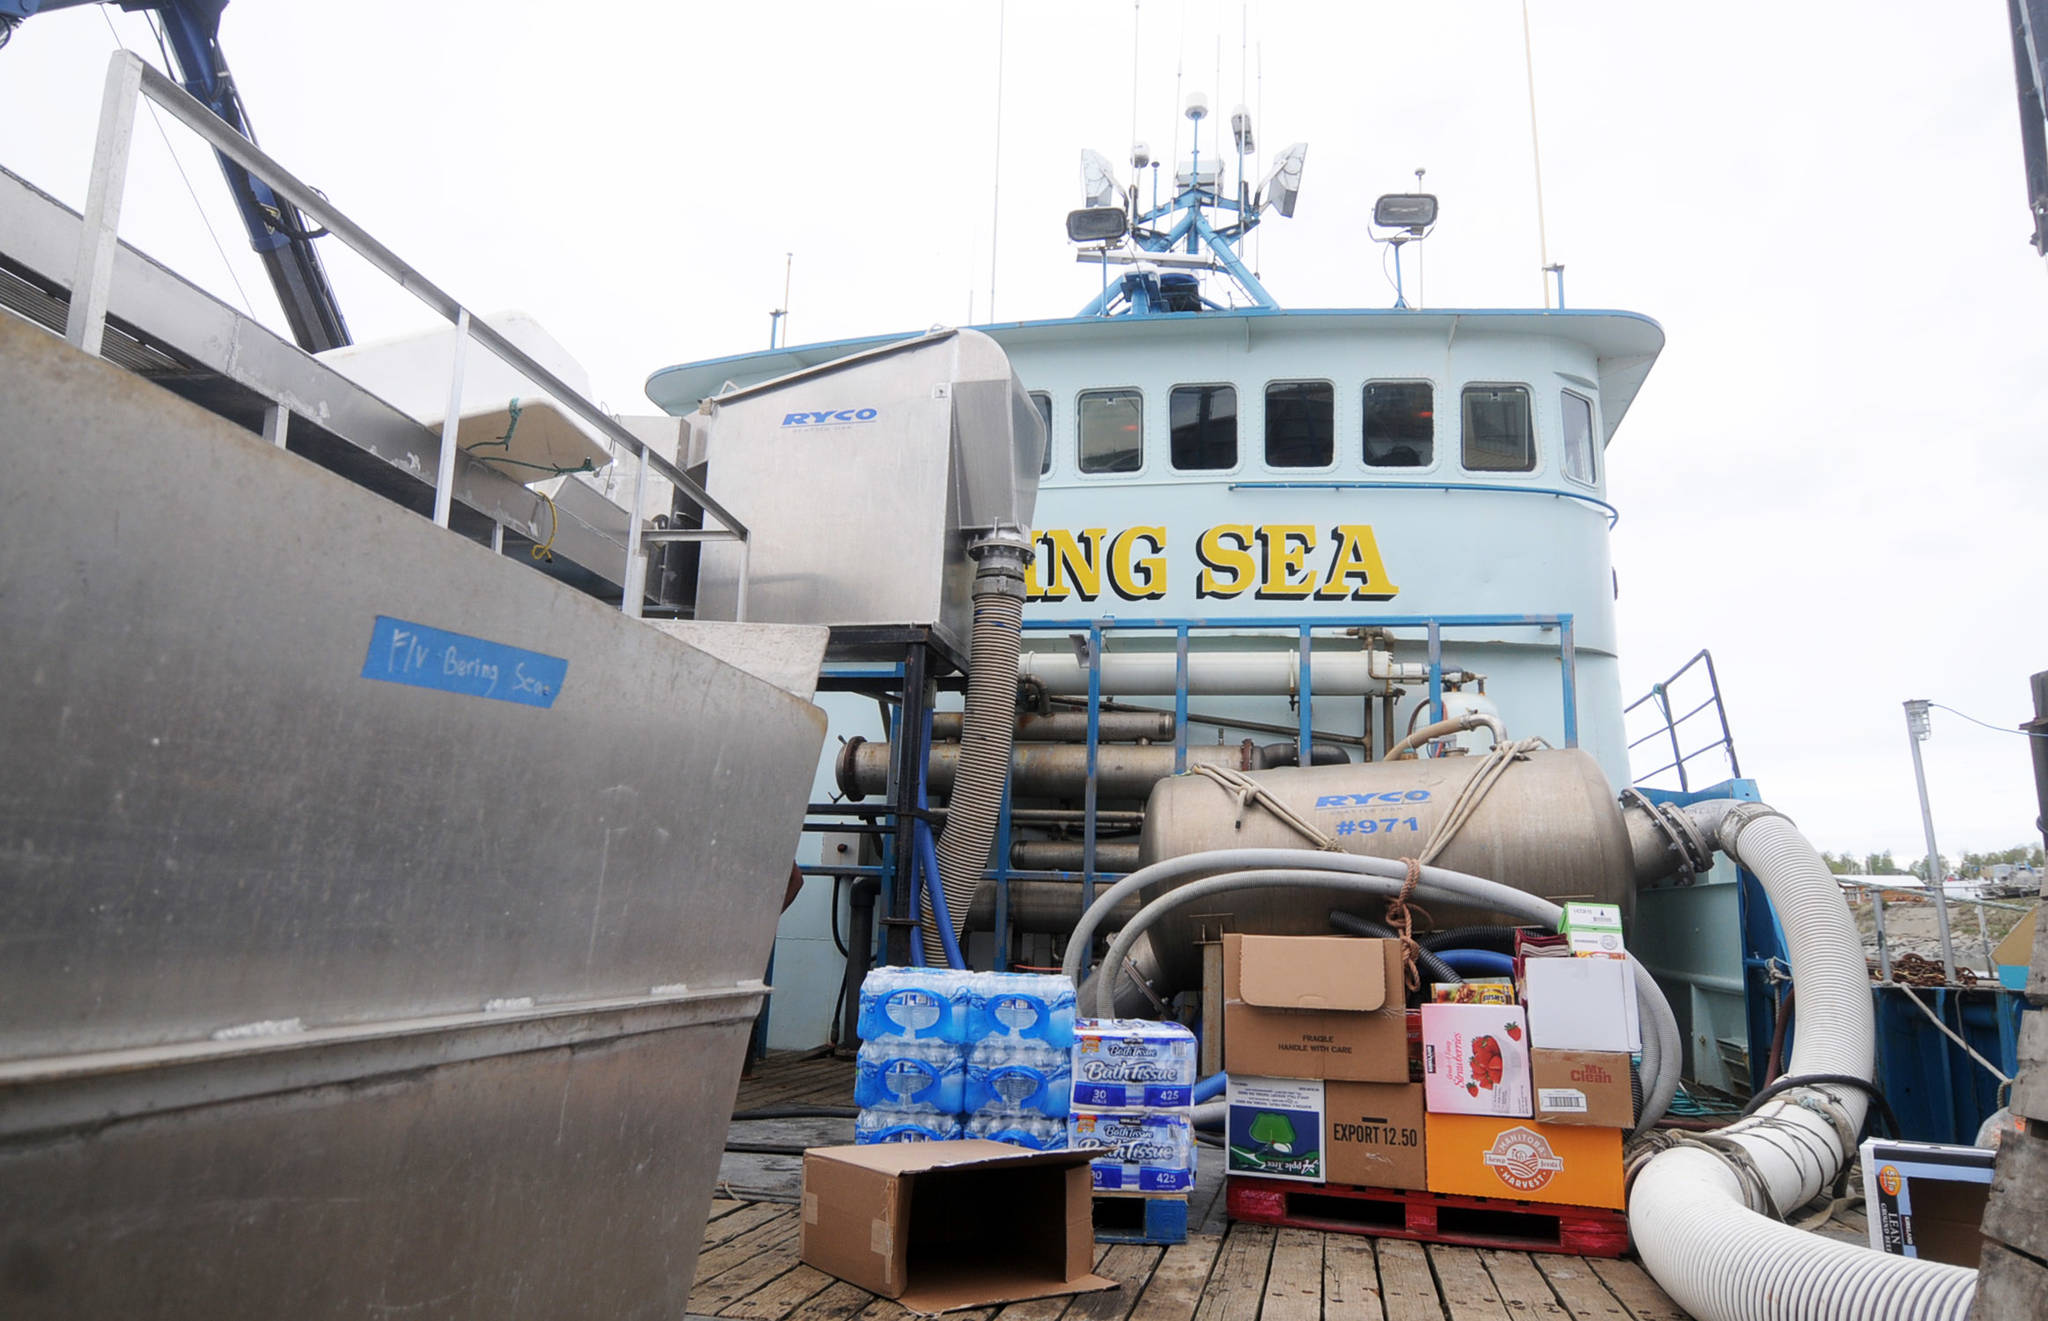 This Friday photo shows the F/V Bering Sea docked at Snug Harbor Seafoods in Kenai. A former crab fishing vessel, the Bering Sea now serves as a tender for the processing company. (Photo by Elizabeth Earl/Peninsula Clarion)